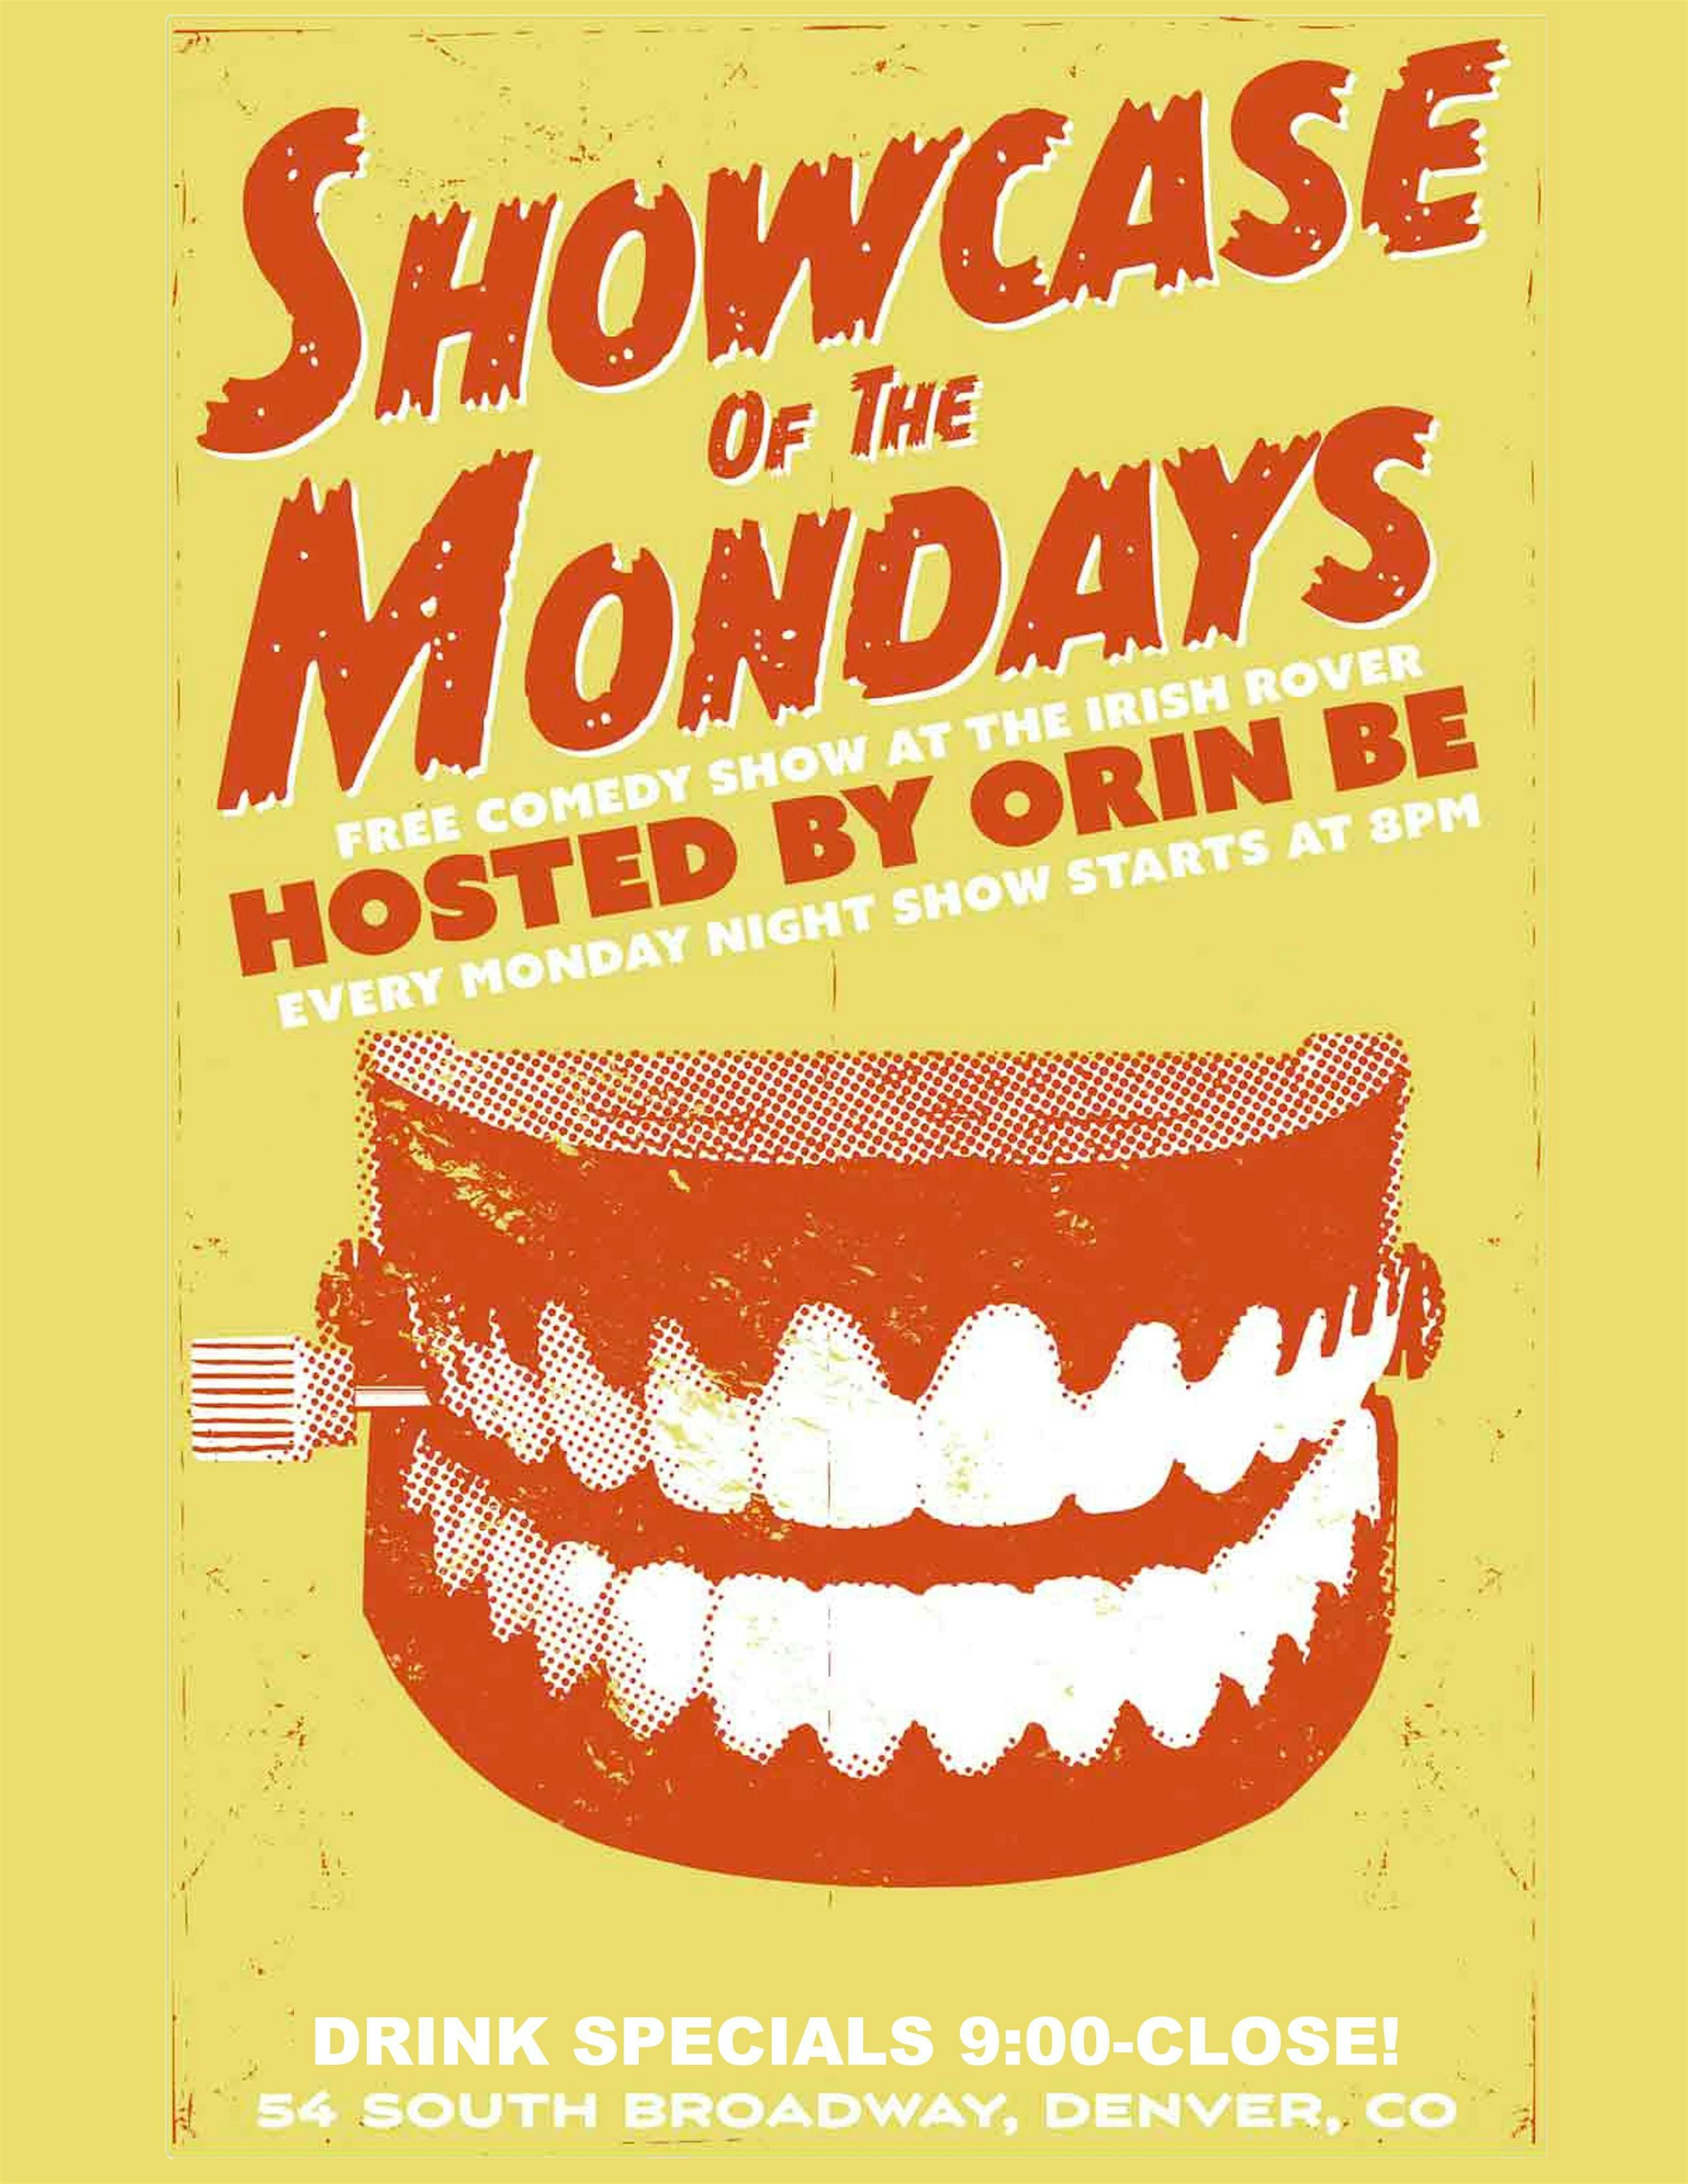 Free Comedy Show at the Irish Rover. Showcase of the Mondays!